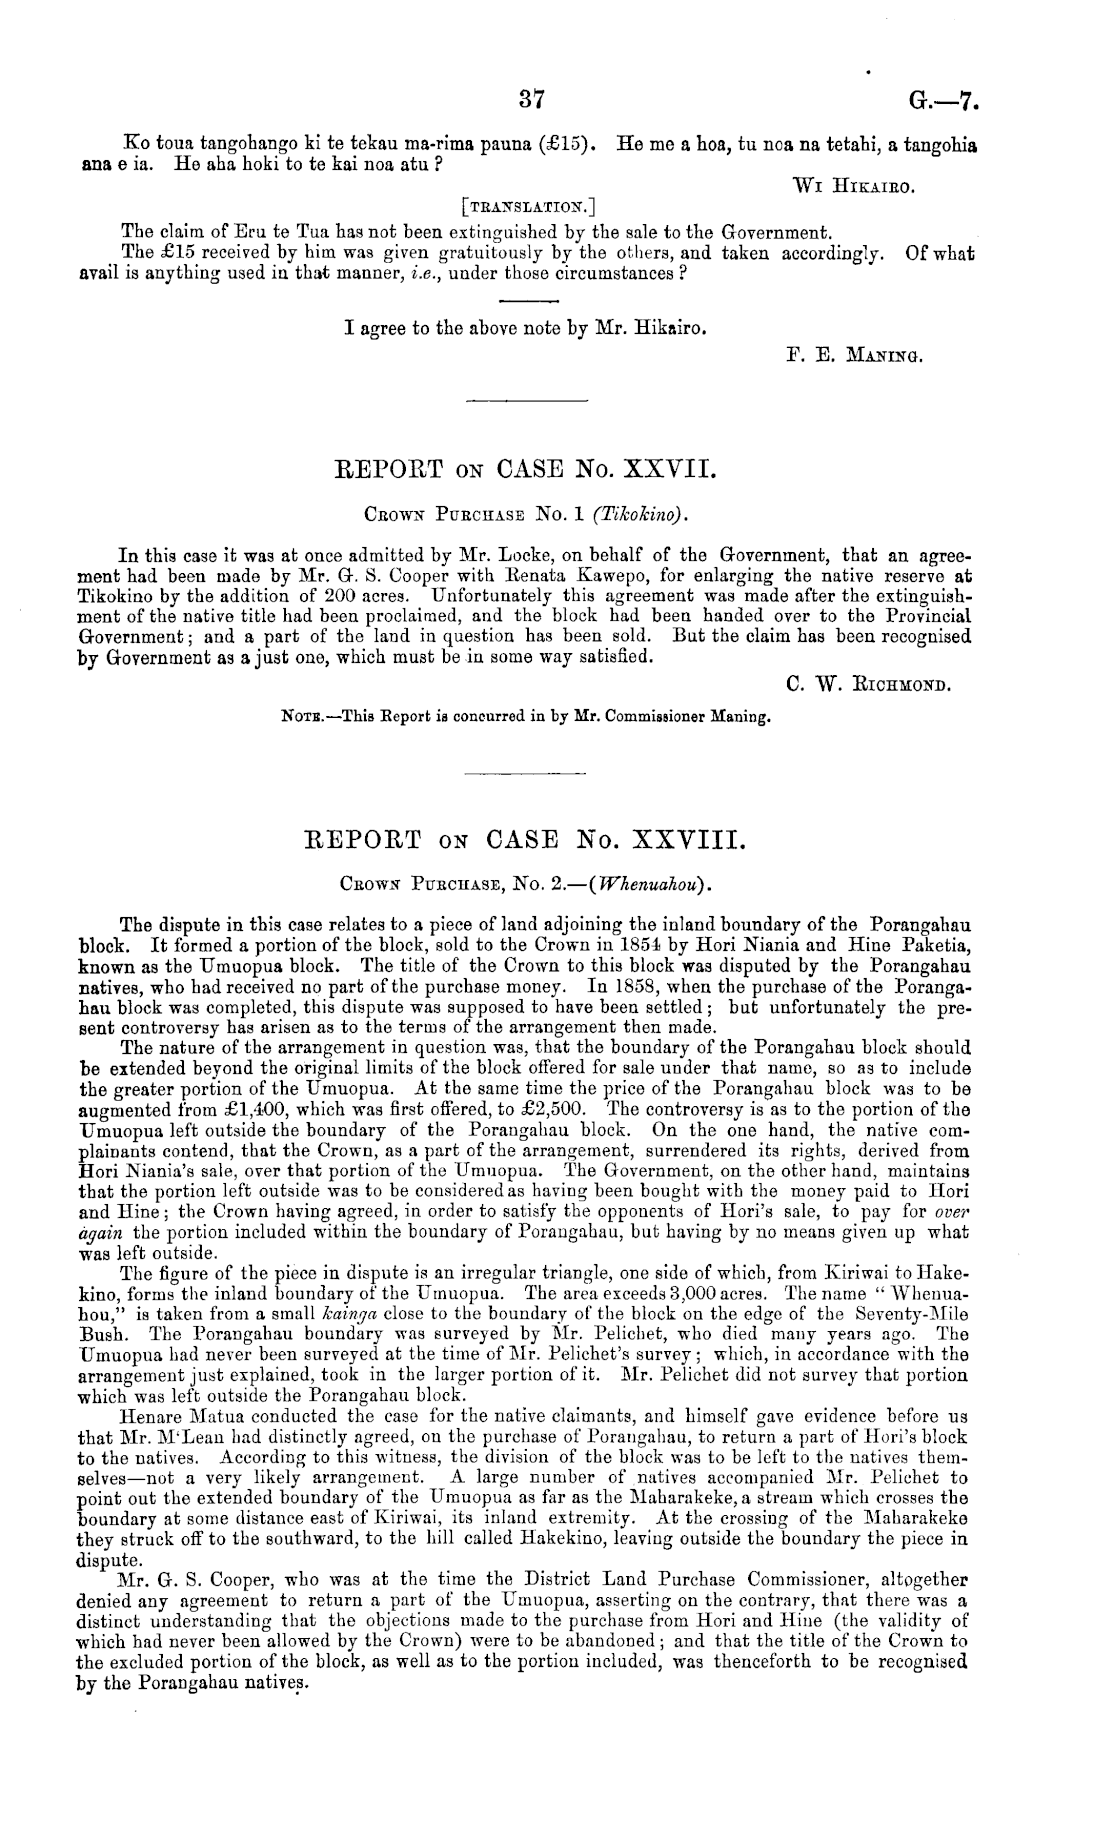 Papers Past, Parliamentary Papers, Appendix to the Journals of the House  of Representatives, 1873 Session I